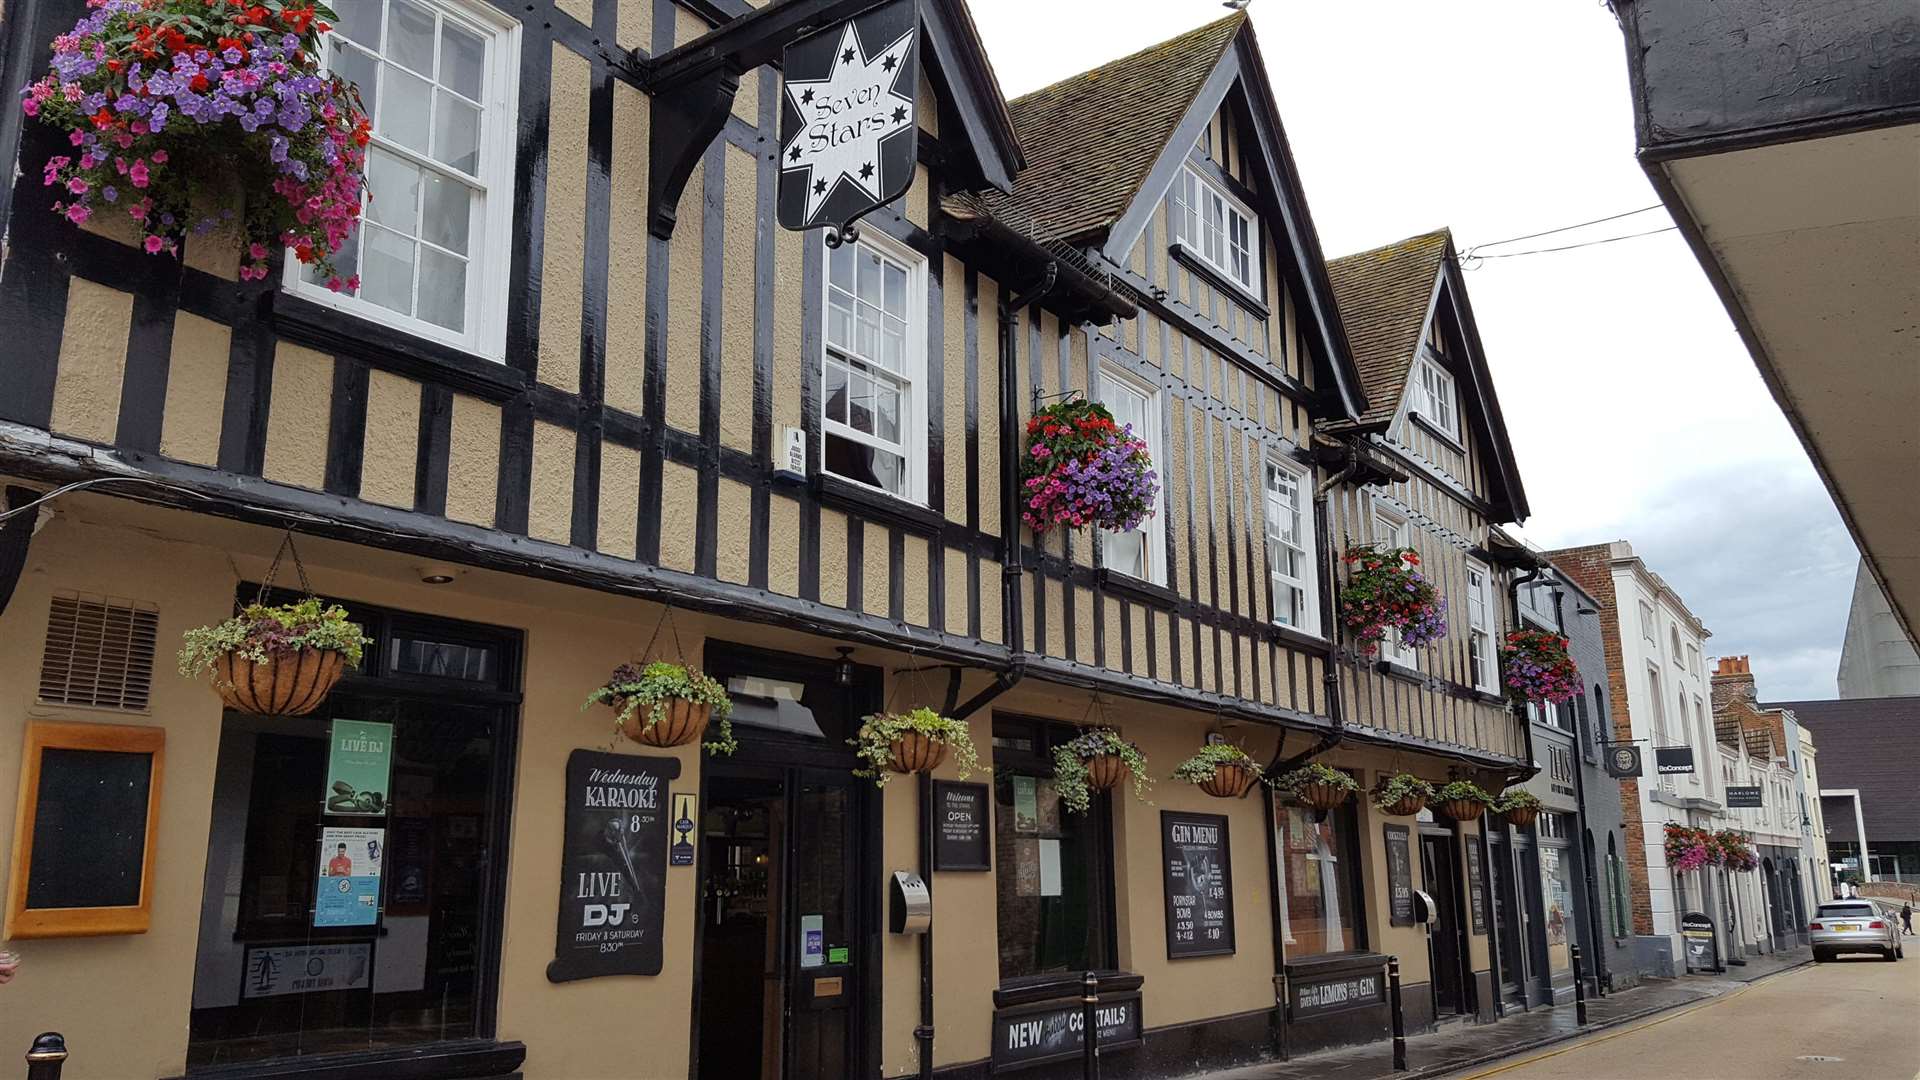 The incident took place at the Seven Stars pub in Canterbury earlier this month